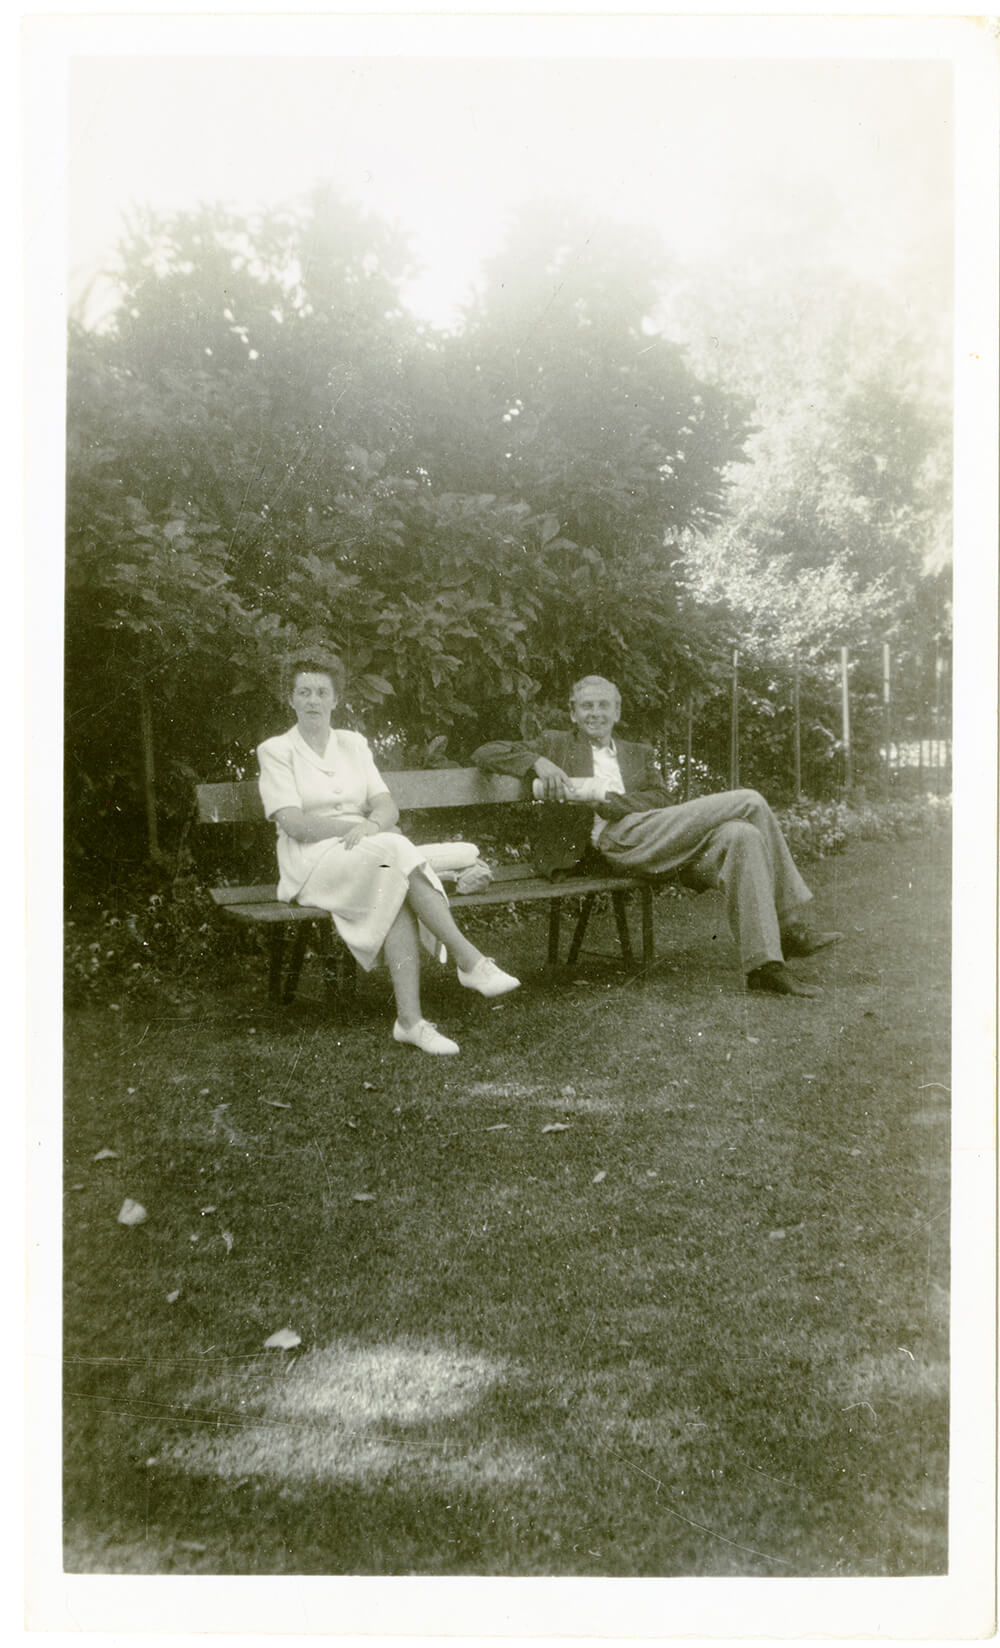 Man and woman seated on a park bench at Albury Botanic Gardens, 1950. ARM 97.977